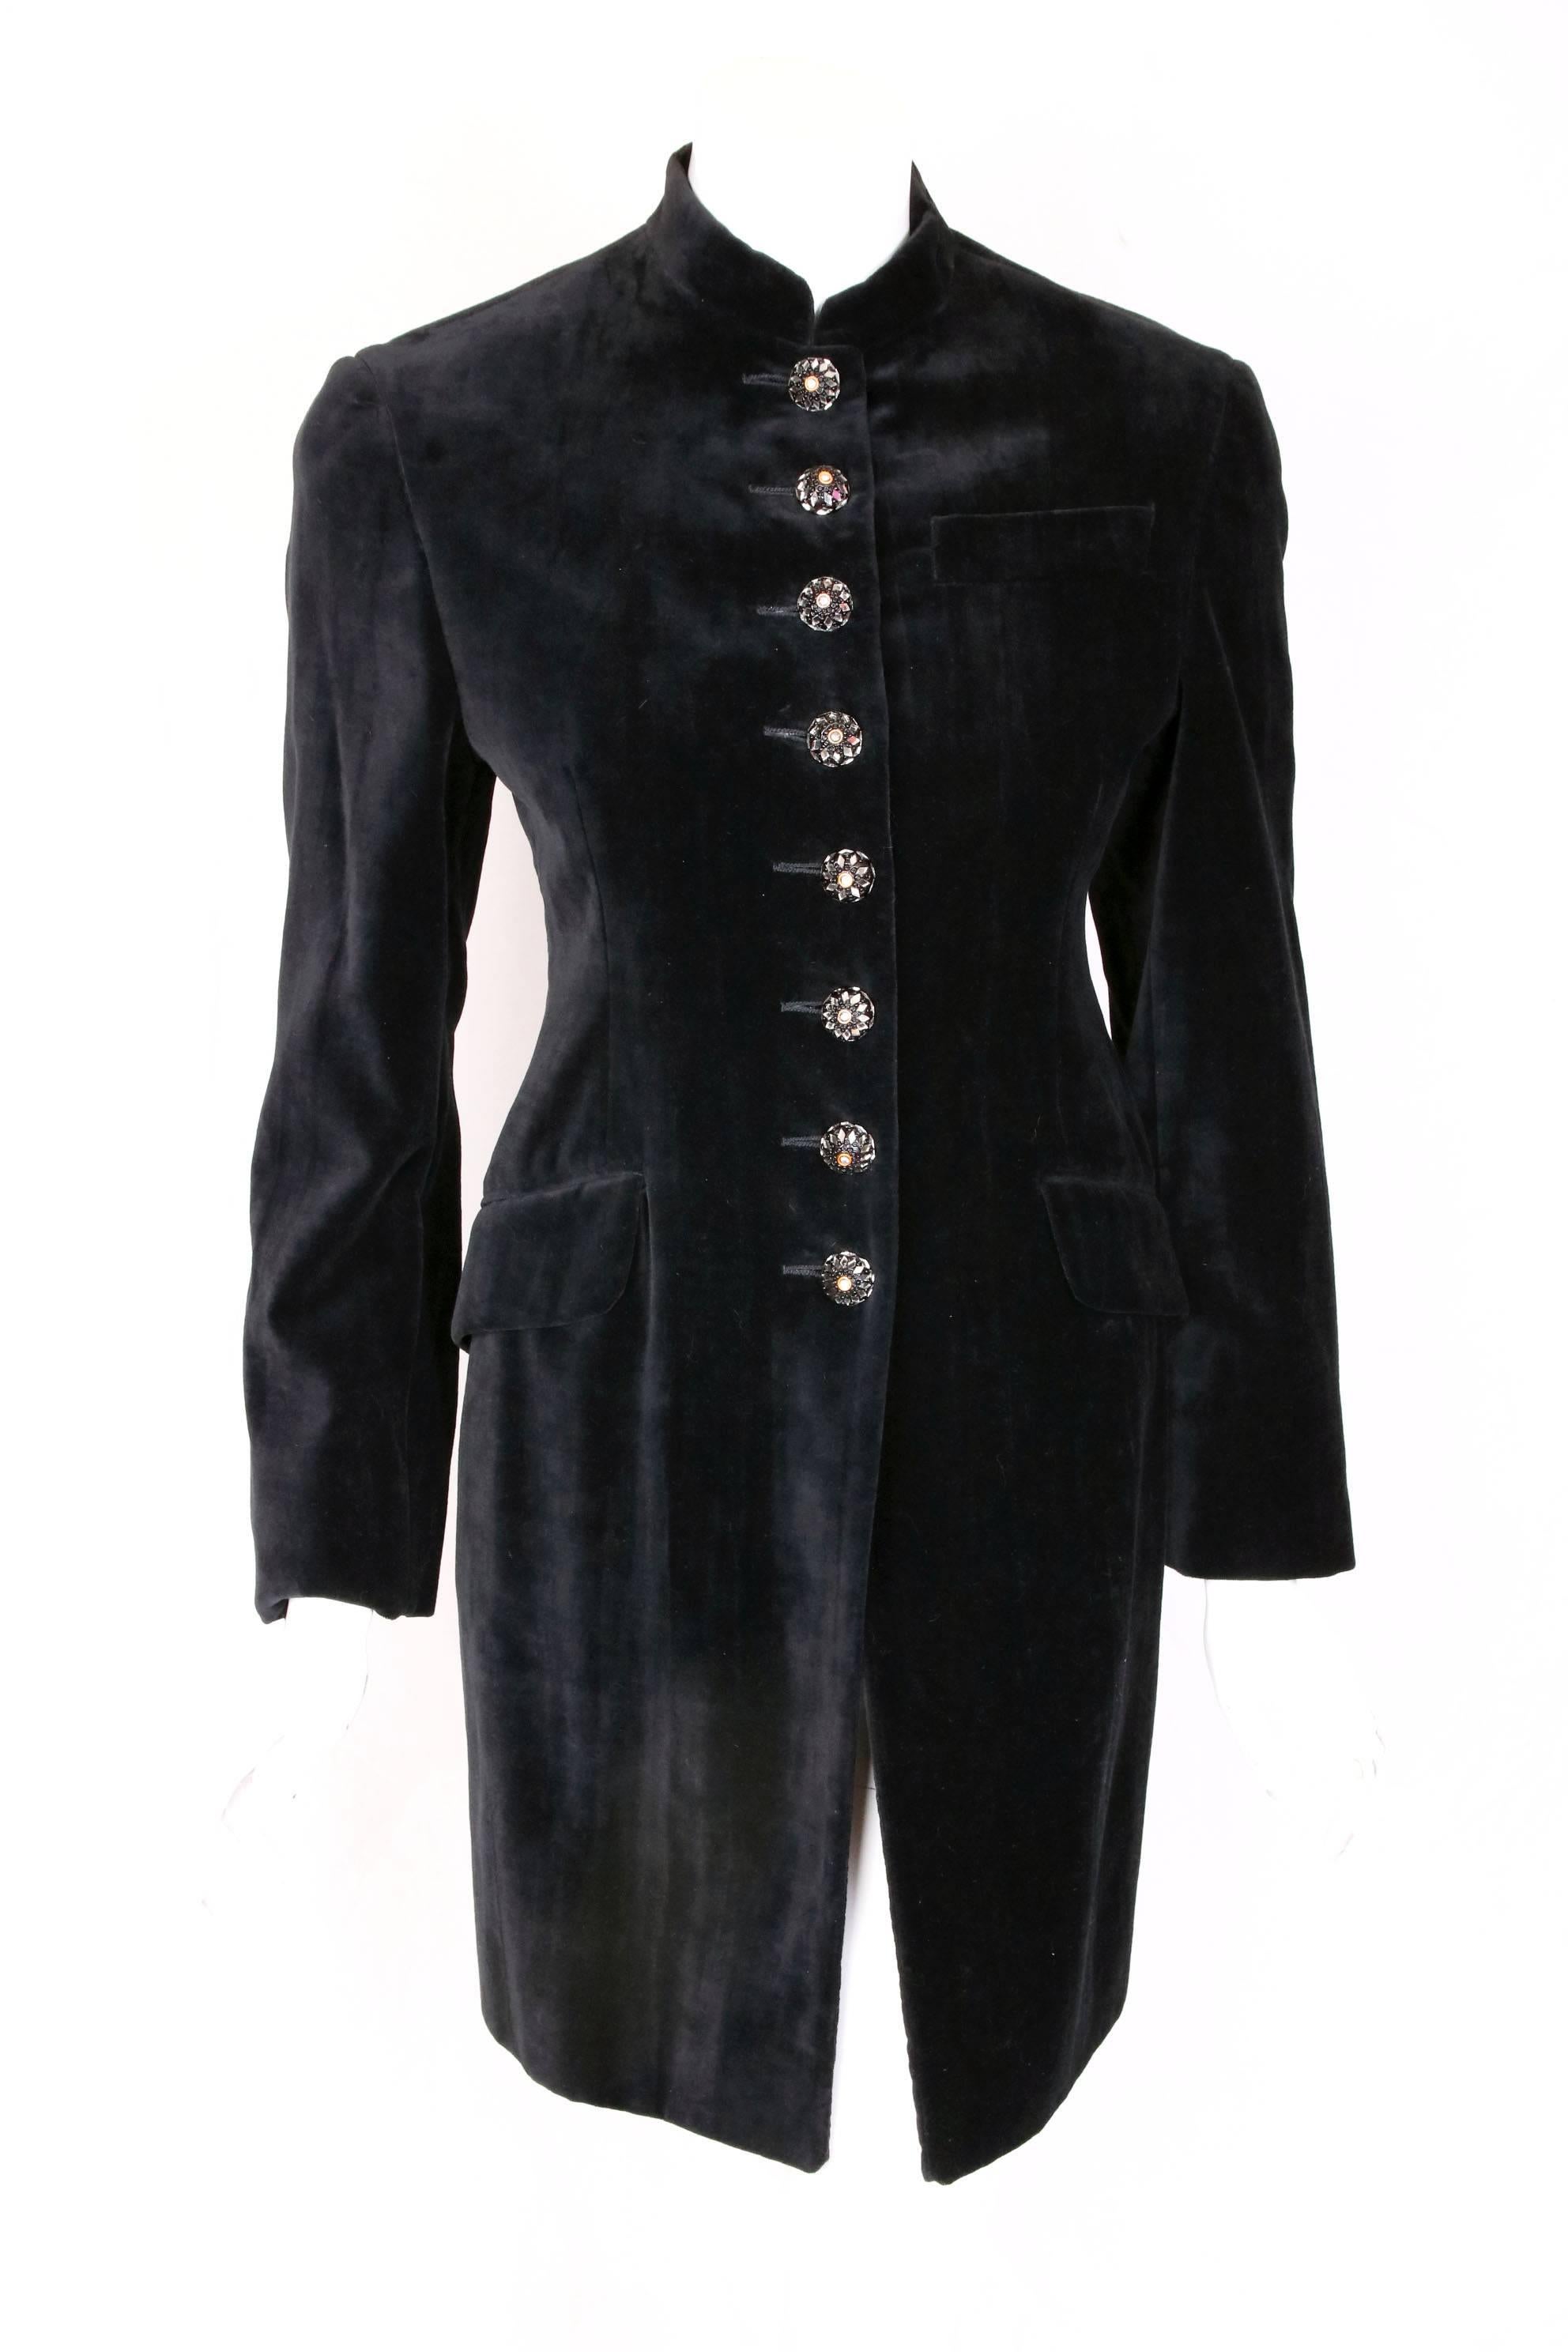 A circa 1989 Romeo Gigli black velvet fitted coat with nehru collar, oversized dome-shaped mirrored buttons, three frontal pockets and kick pleat at the back.  Fully lined. In excellent condition. Size tag 40. Please consult